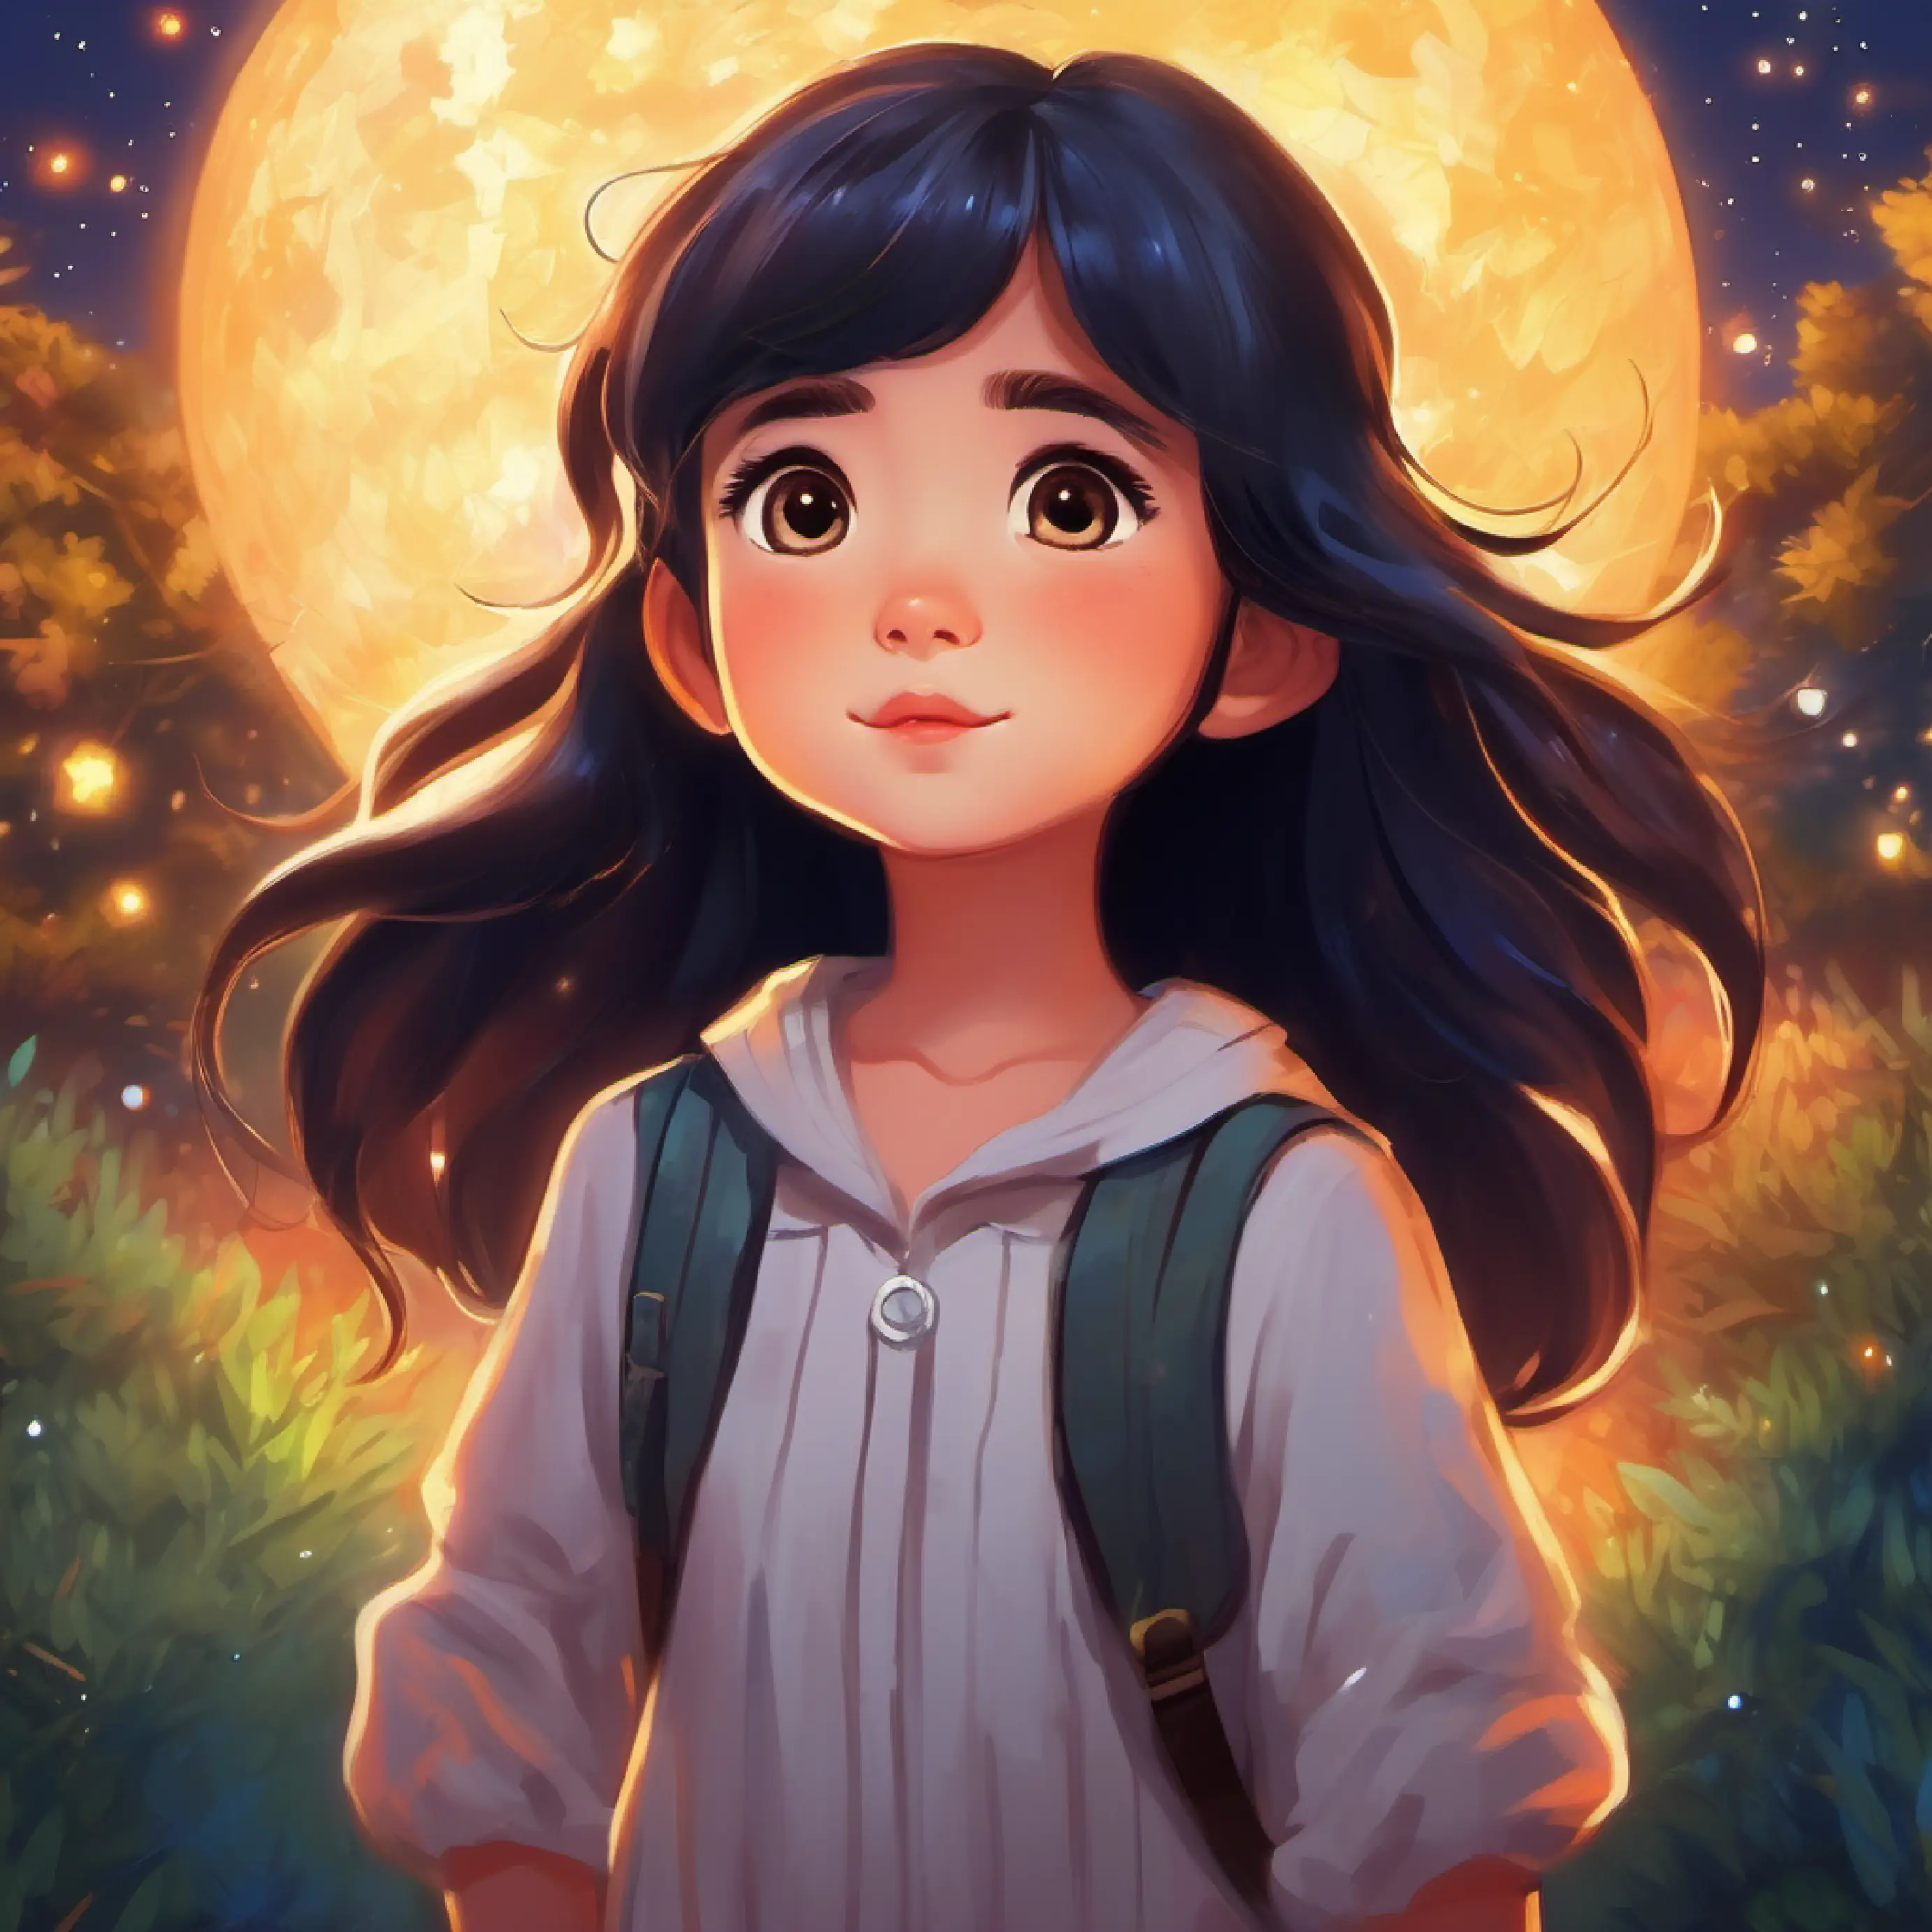 Curious girl, midnight hair, bright, sparkling eyes's return home, starlit sky and lessons learned.